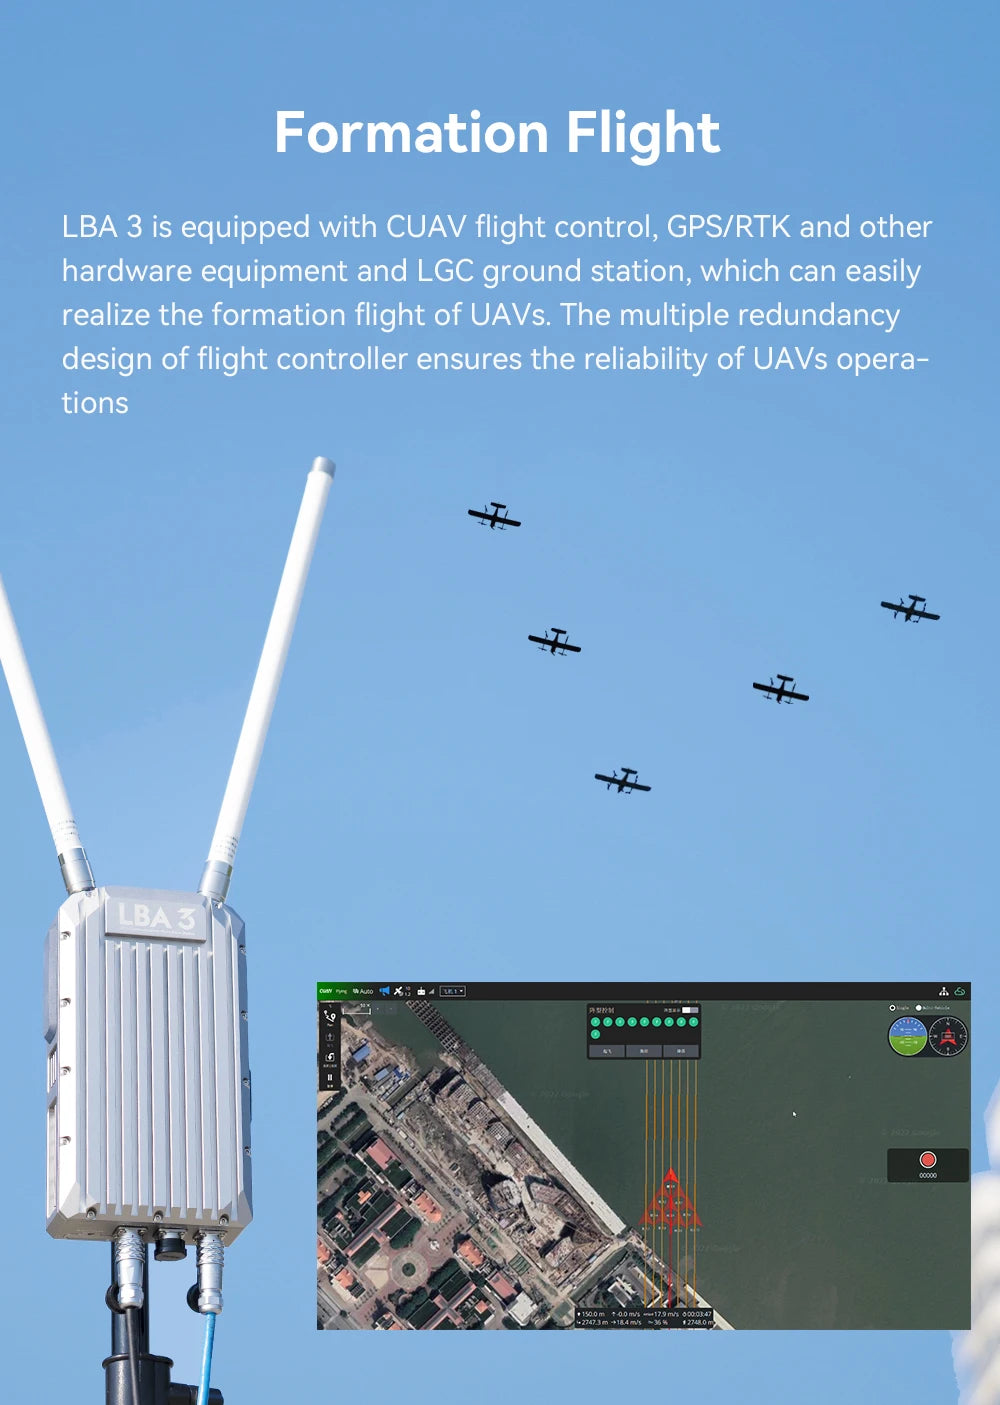 CUAV New Industrial LBA 3 Micro Private Network, formation flight LBA 3 is equipped with CUAV flight control, GPSIRTK and other